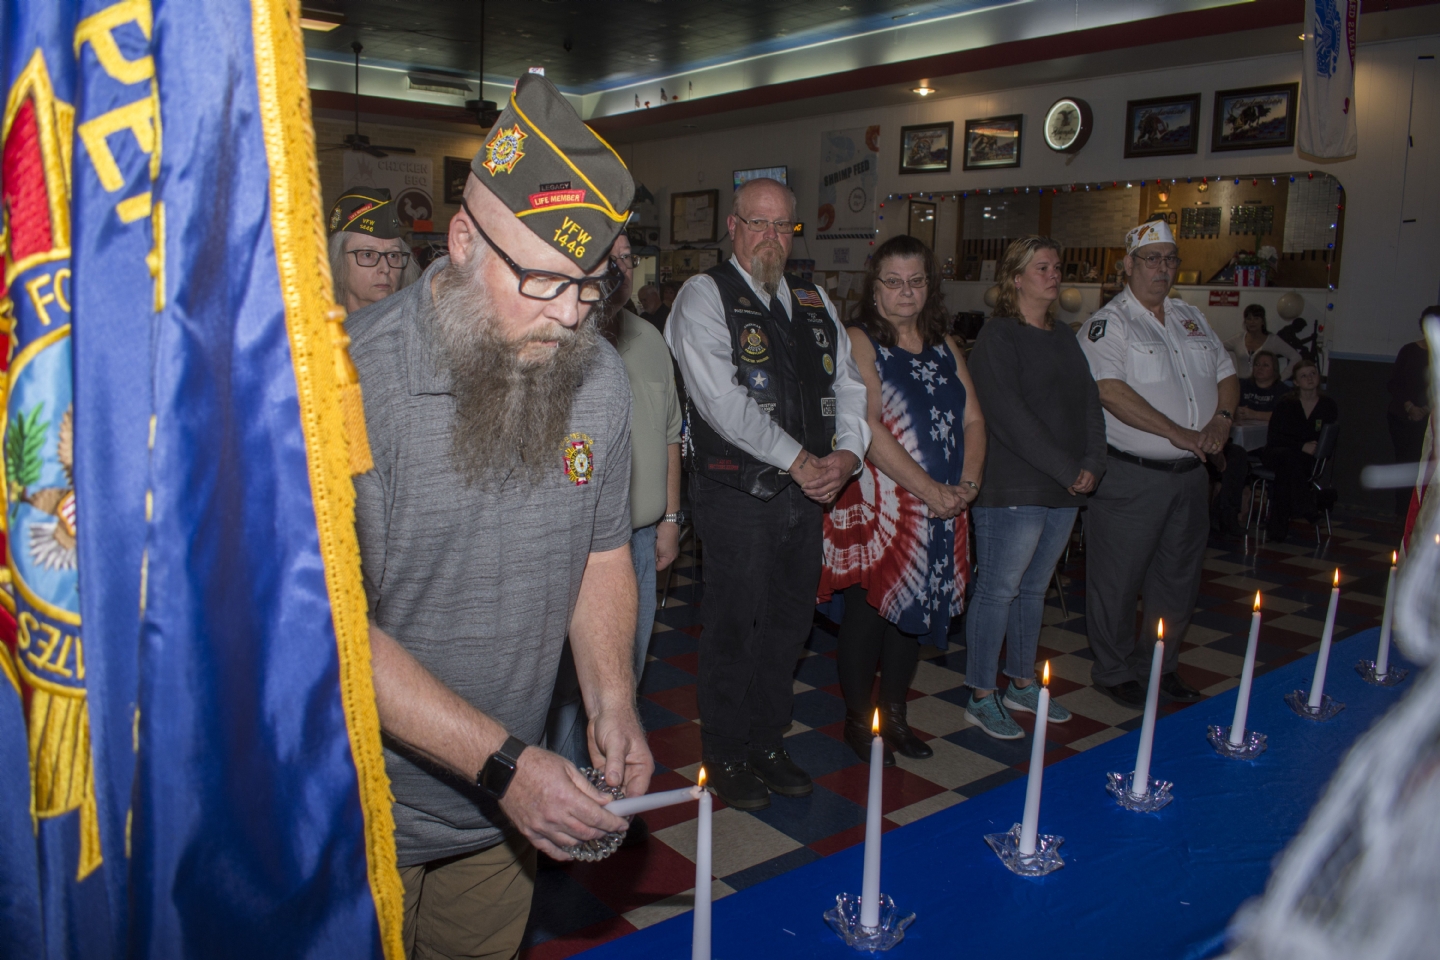 Lighting a Candle for Vets